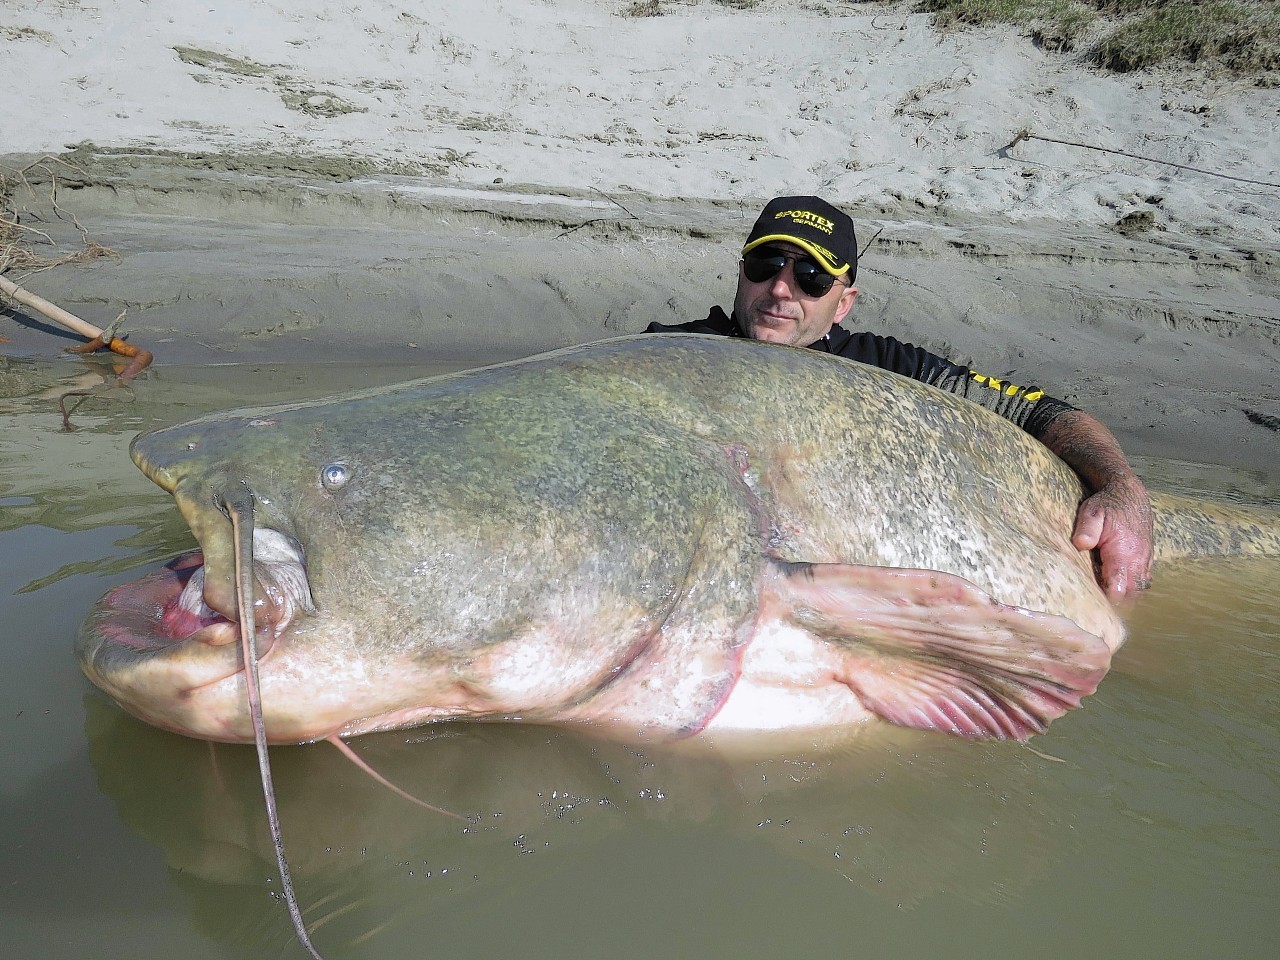  Italian fisherman Dino Ferrari poses for a picture with an 8ft 10in long catfish caught in the Po River in the outskirts of Mantova, some 160 km (99 miles) SE of Milan, northern Italy. 